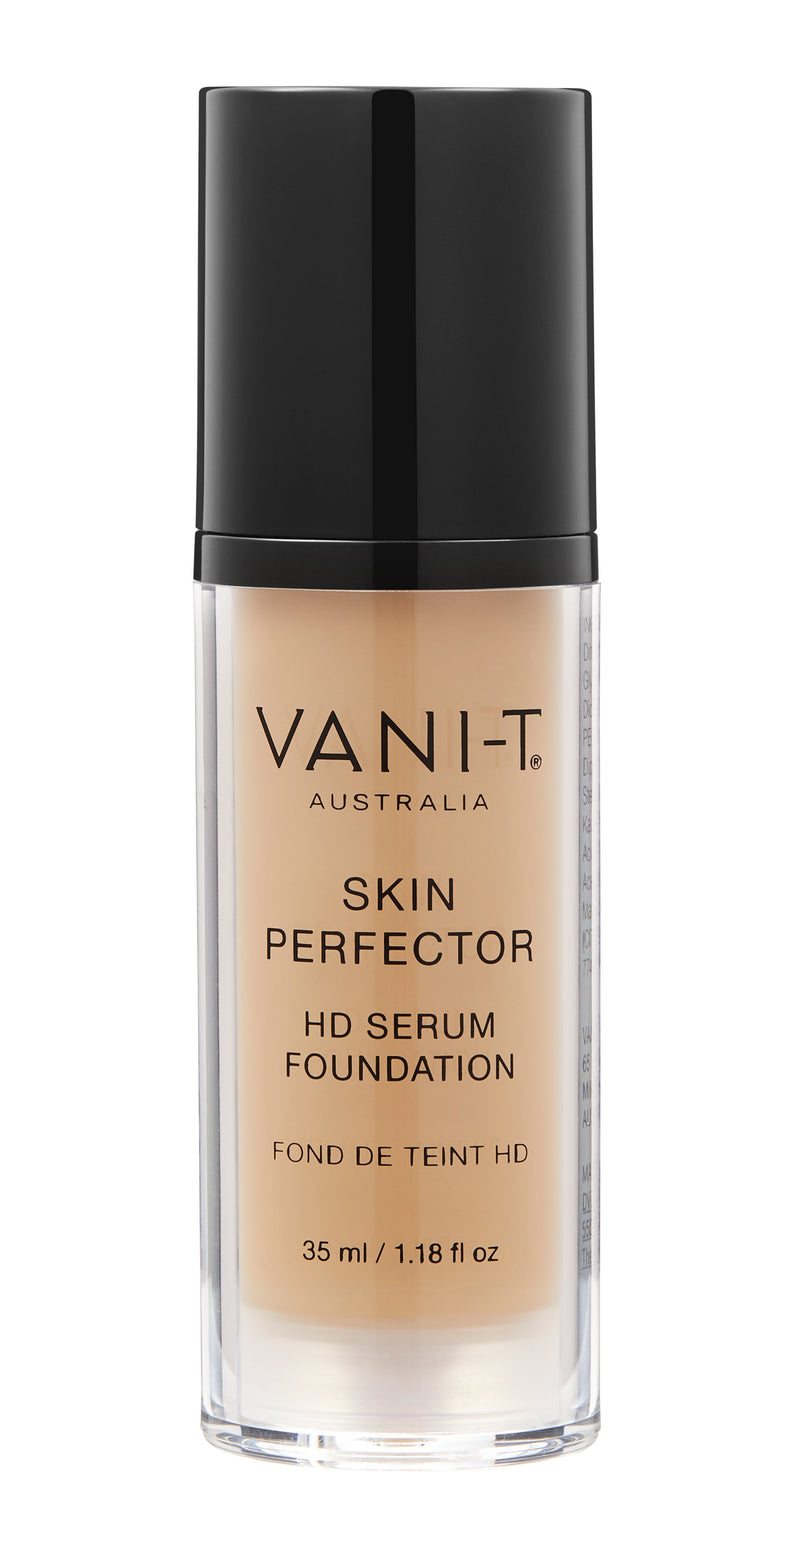 VANI-T Skin Perfector HD Serum Foundation - available in 11 colours - Salon Style